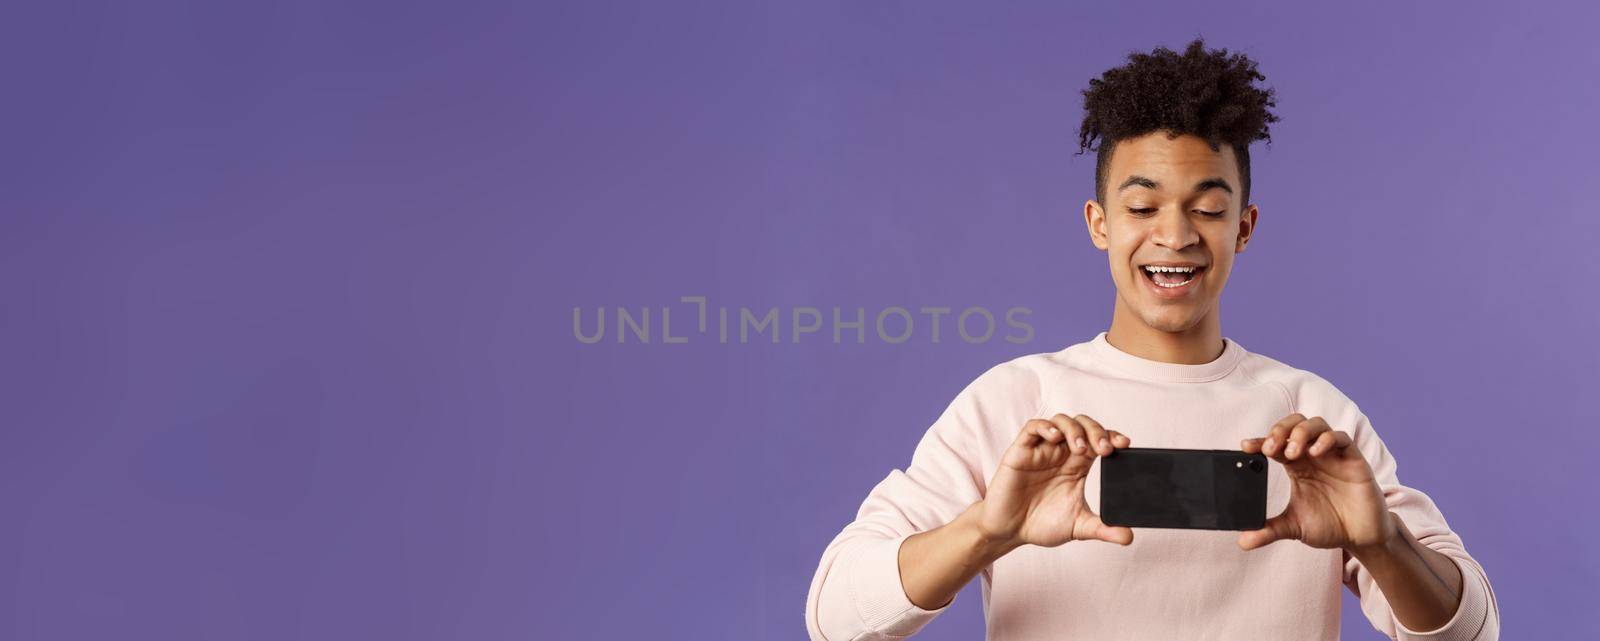 Portrait of amazed, excited young man seeing something interesting, stream concert to his internet social network profile, taking photo or recording video with mobile phone, purple background by Benzoix